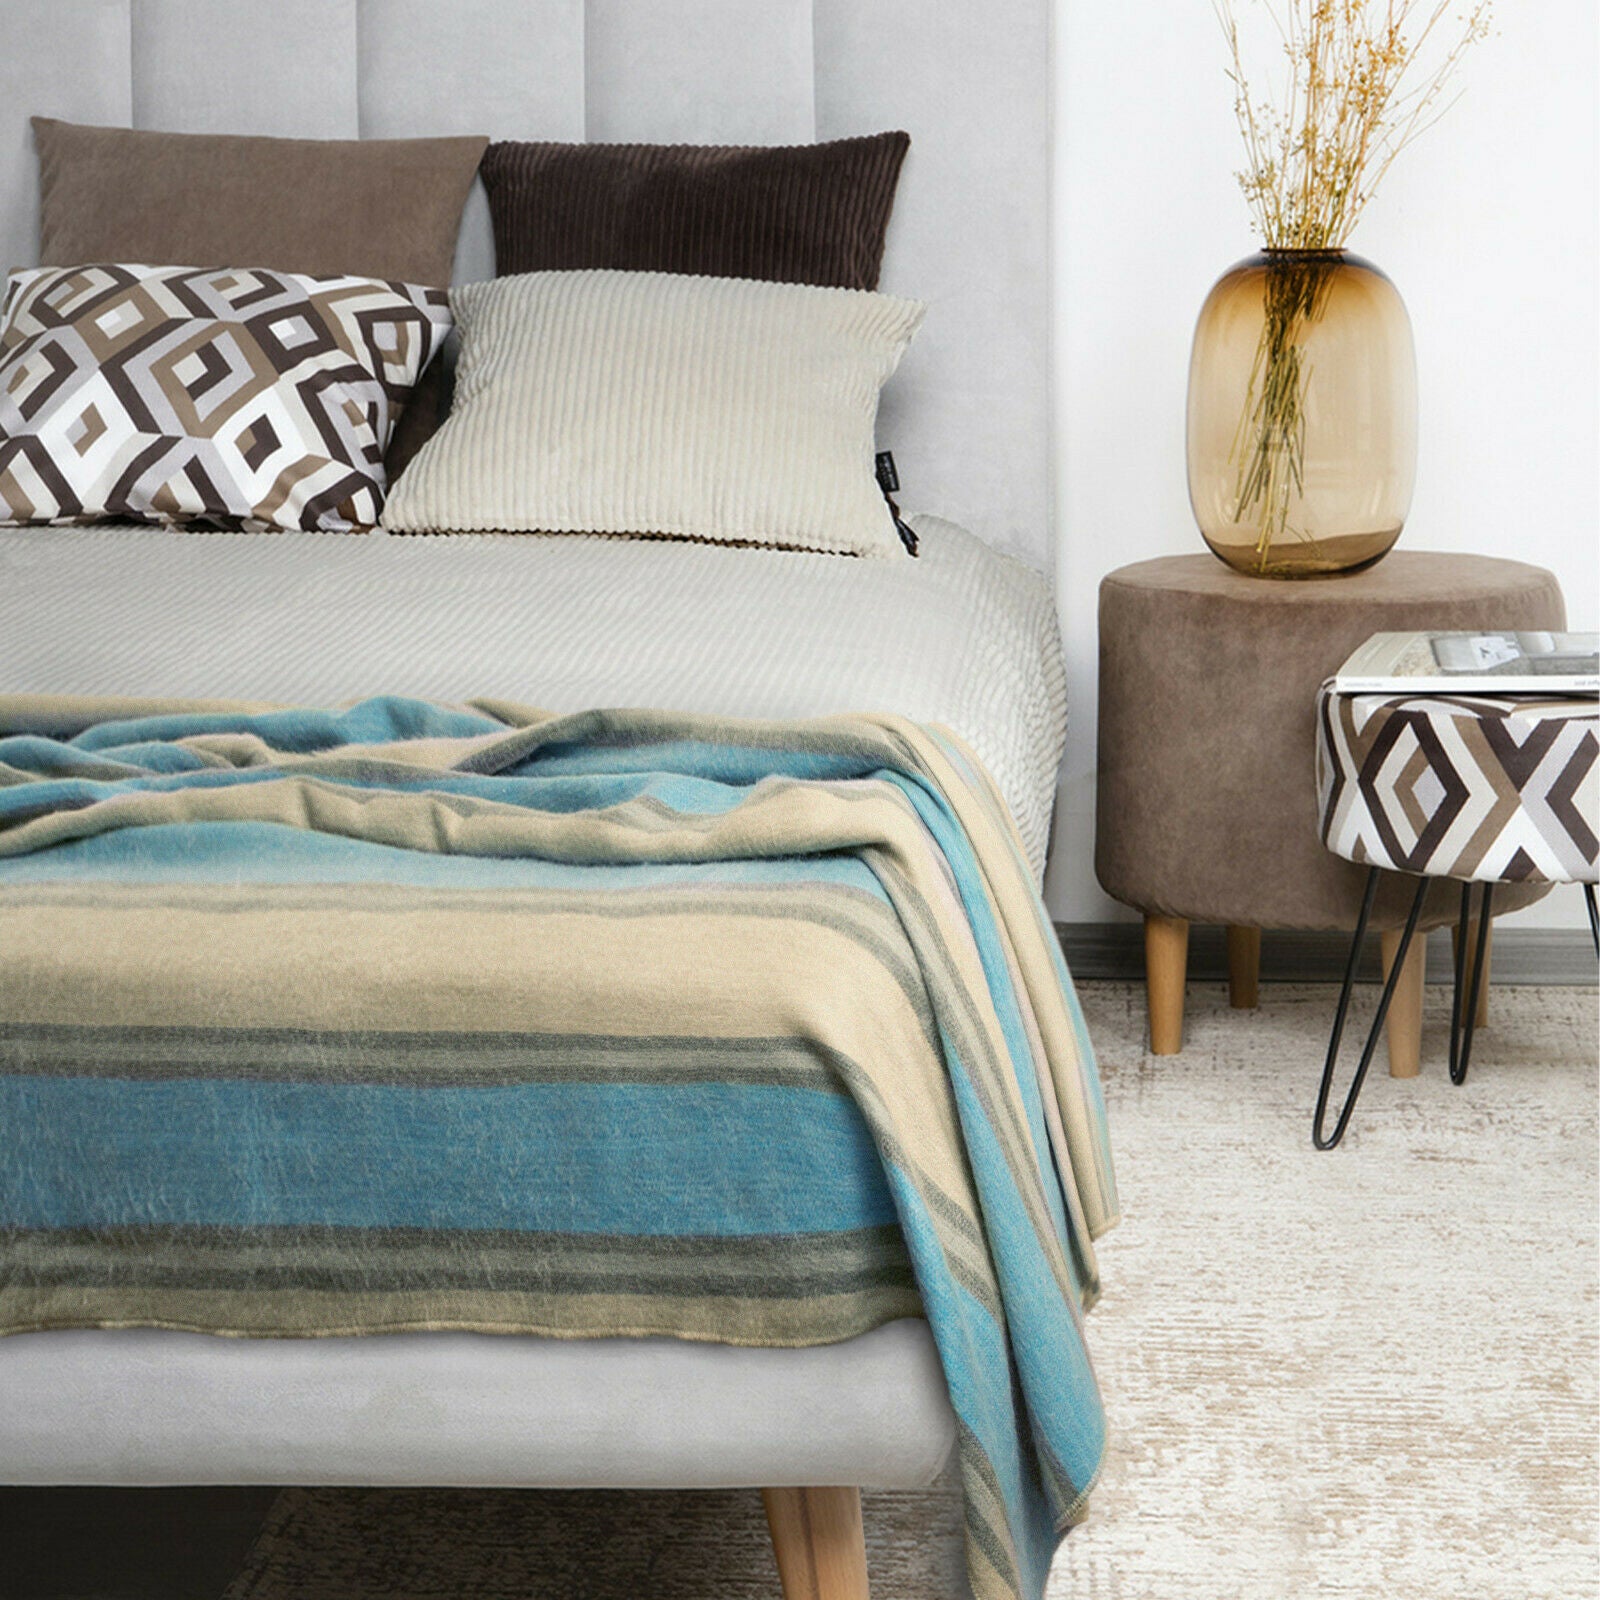 Guayzimi - Baby Alpaca Wool Throw Blanket / Sofa Cover - Queen 95" x 67" - cream turquoise stripes pattern